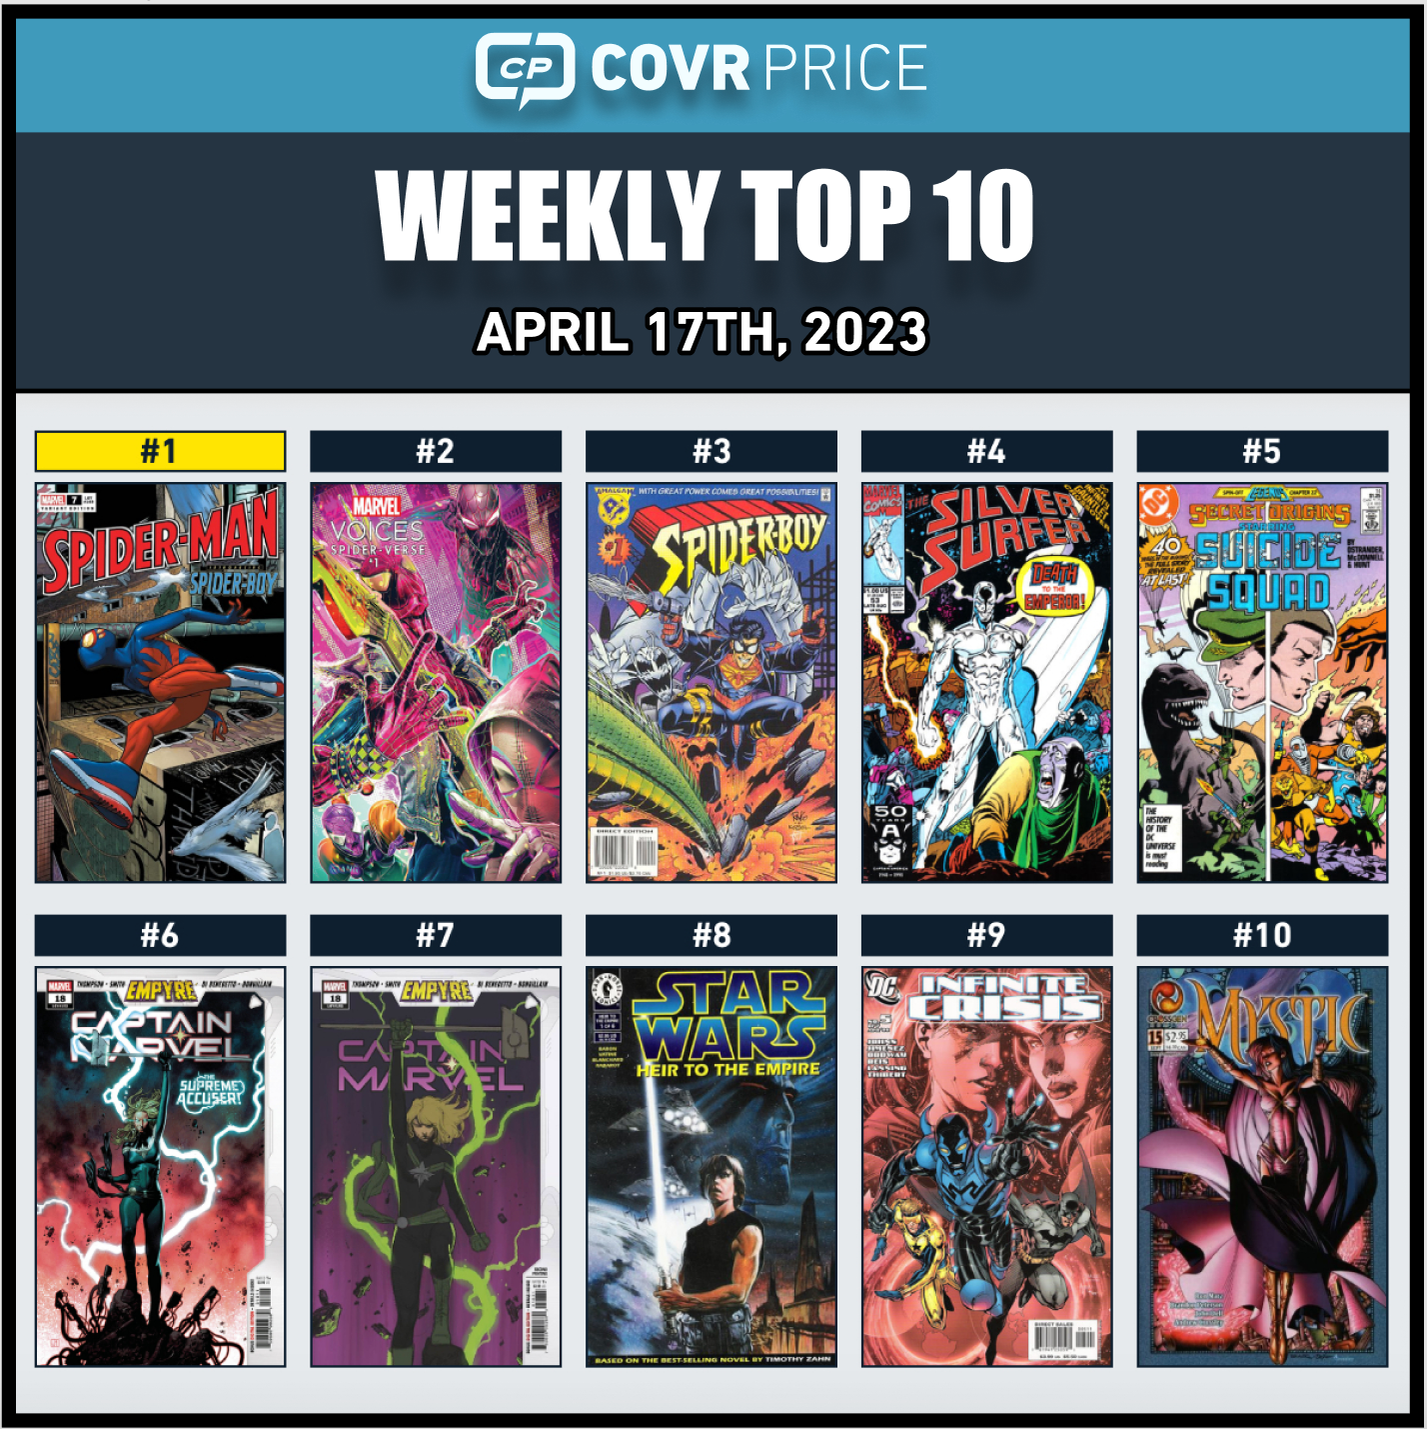 Top 10 Comic Books Rising in Value in the Last Week Include Spider-Boy, The Marvels, and Star Wars